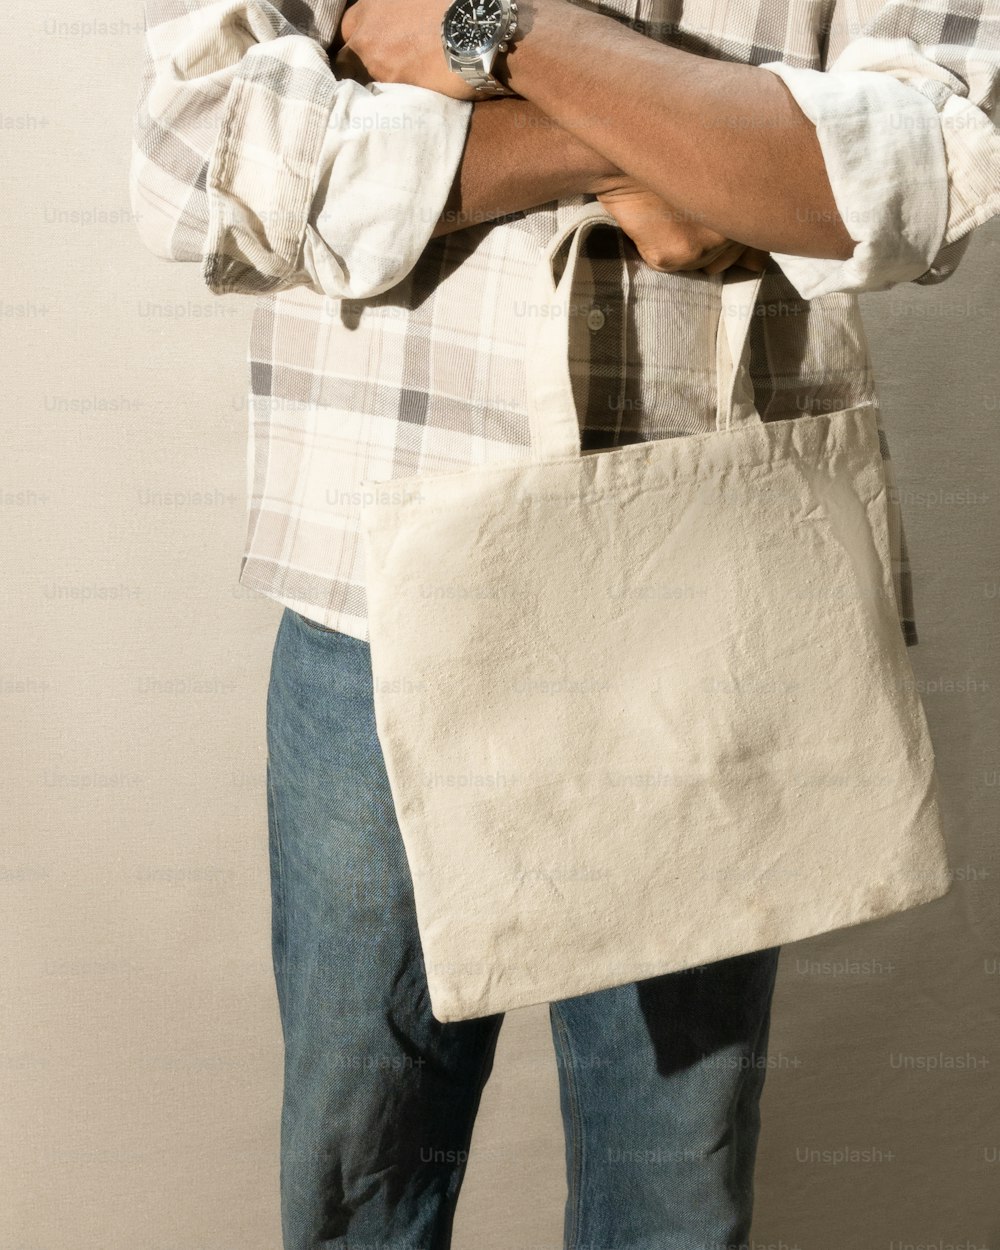 a man holding a white bag in his hands